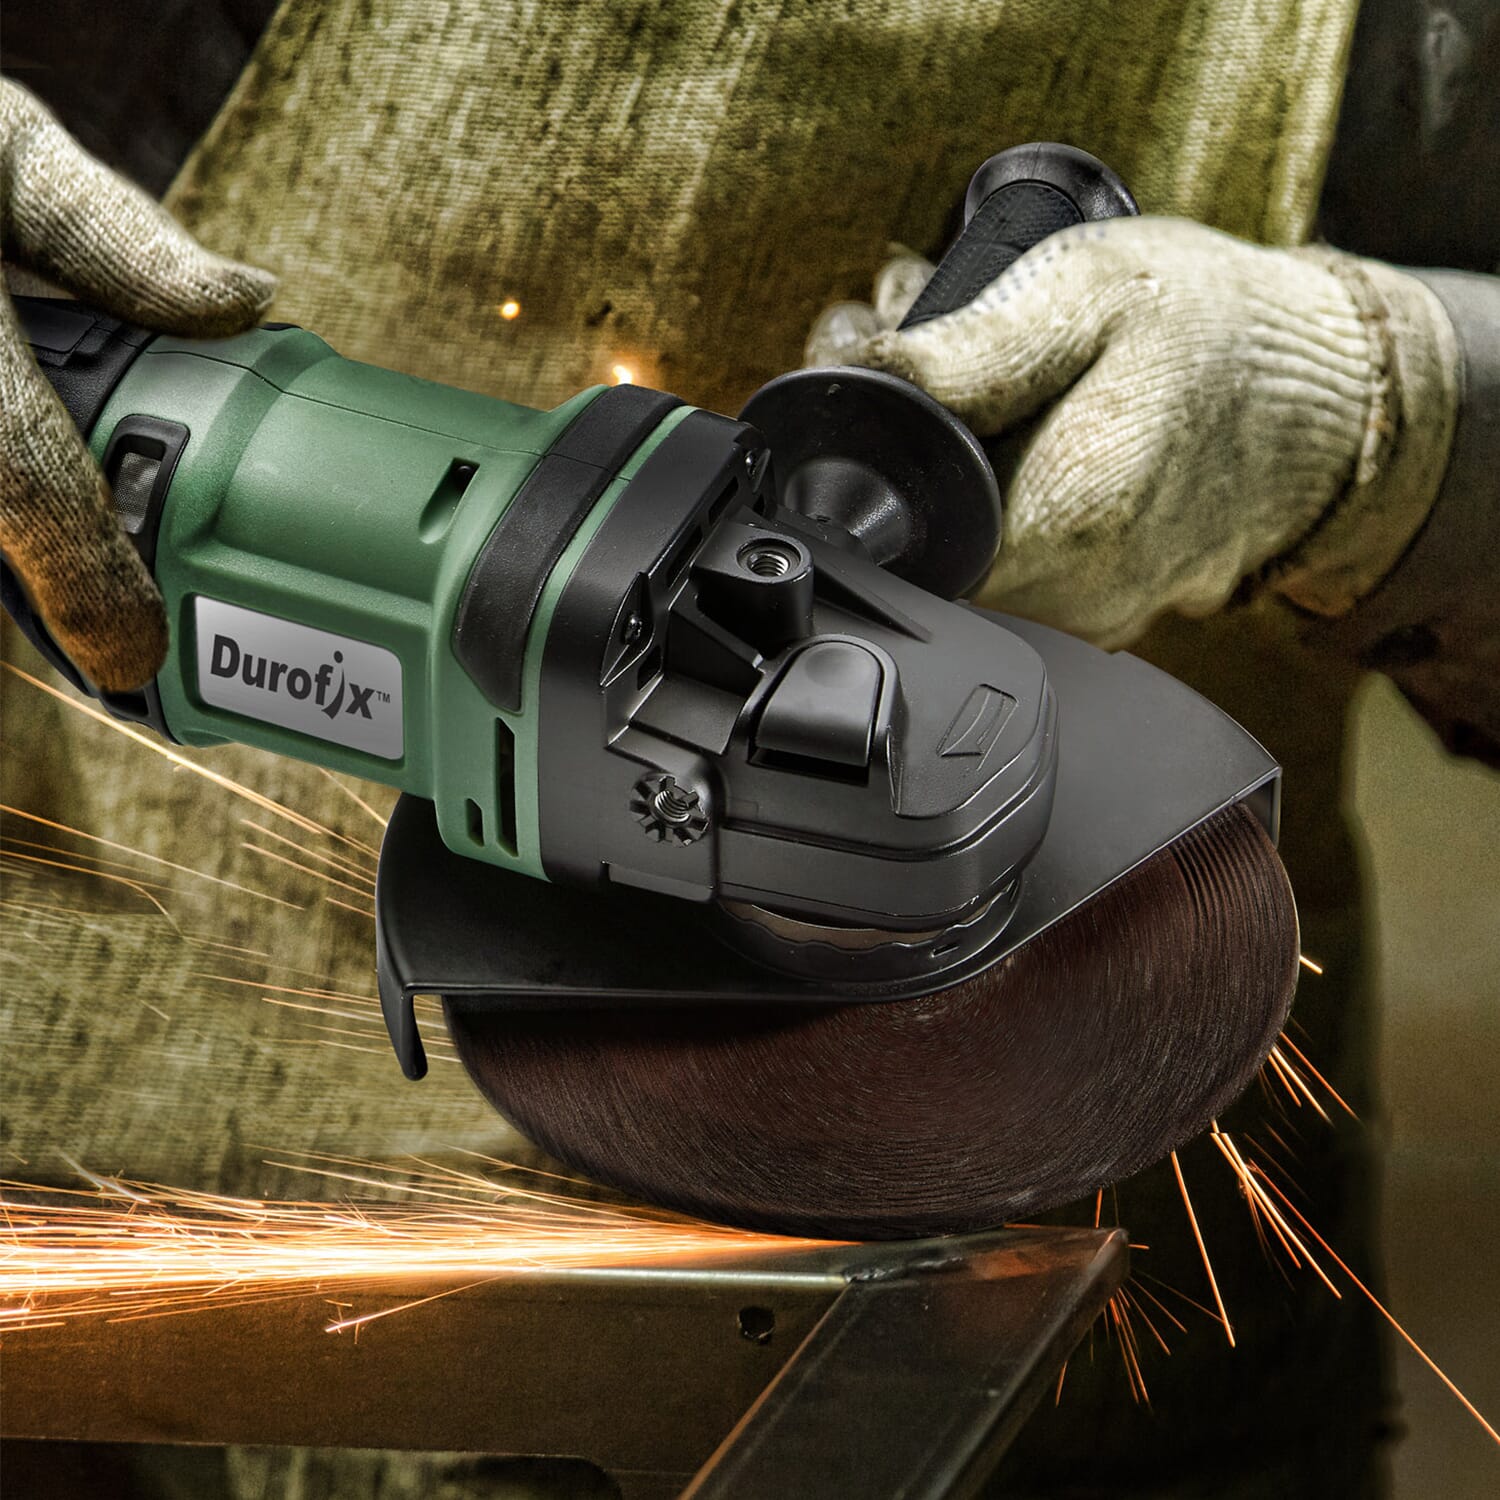 RG6020-180T Lithium-Ion 60V 7" Brushless Angle Grinder Power Tool - Tool Only